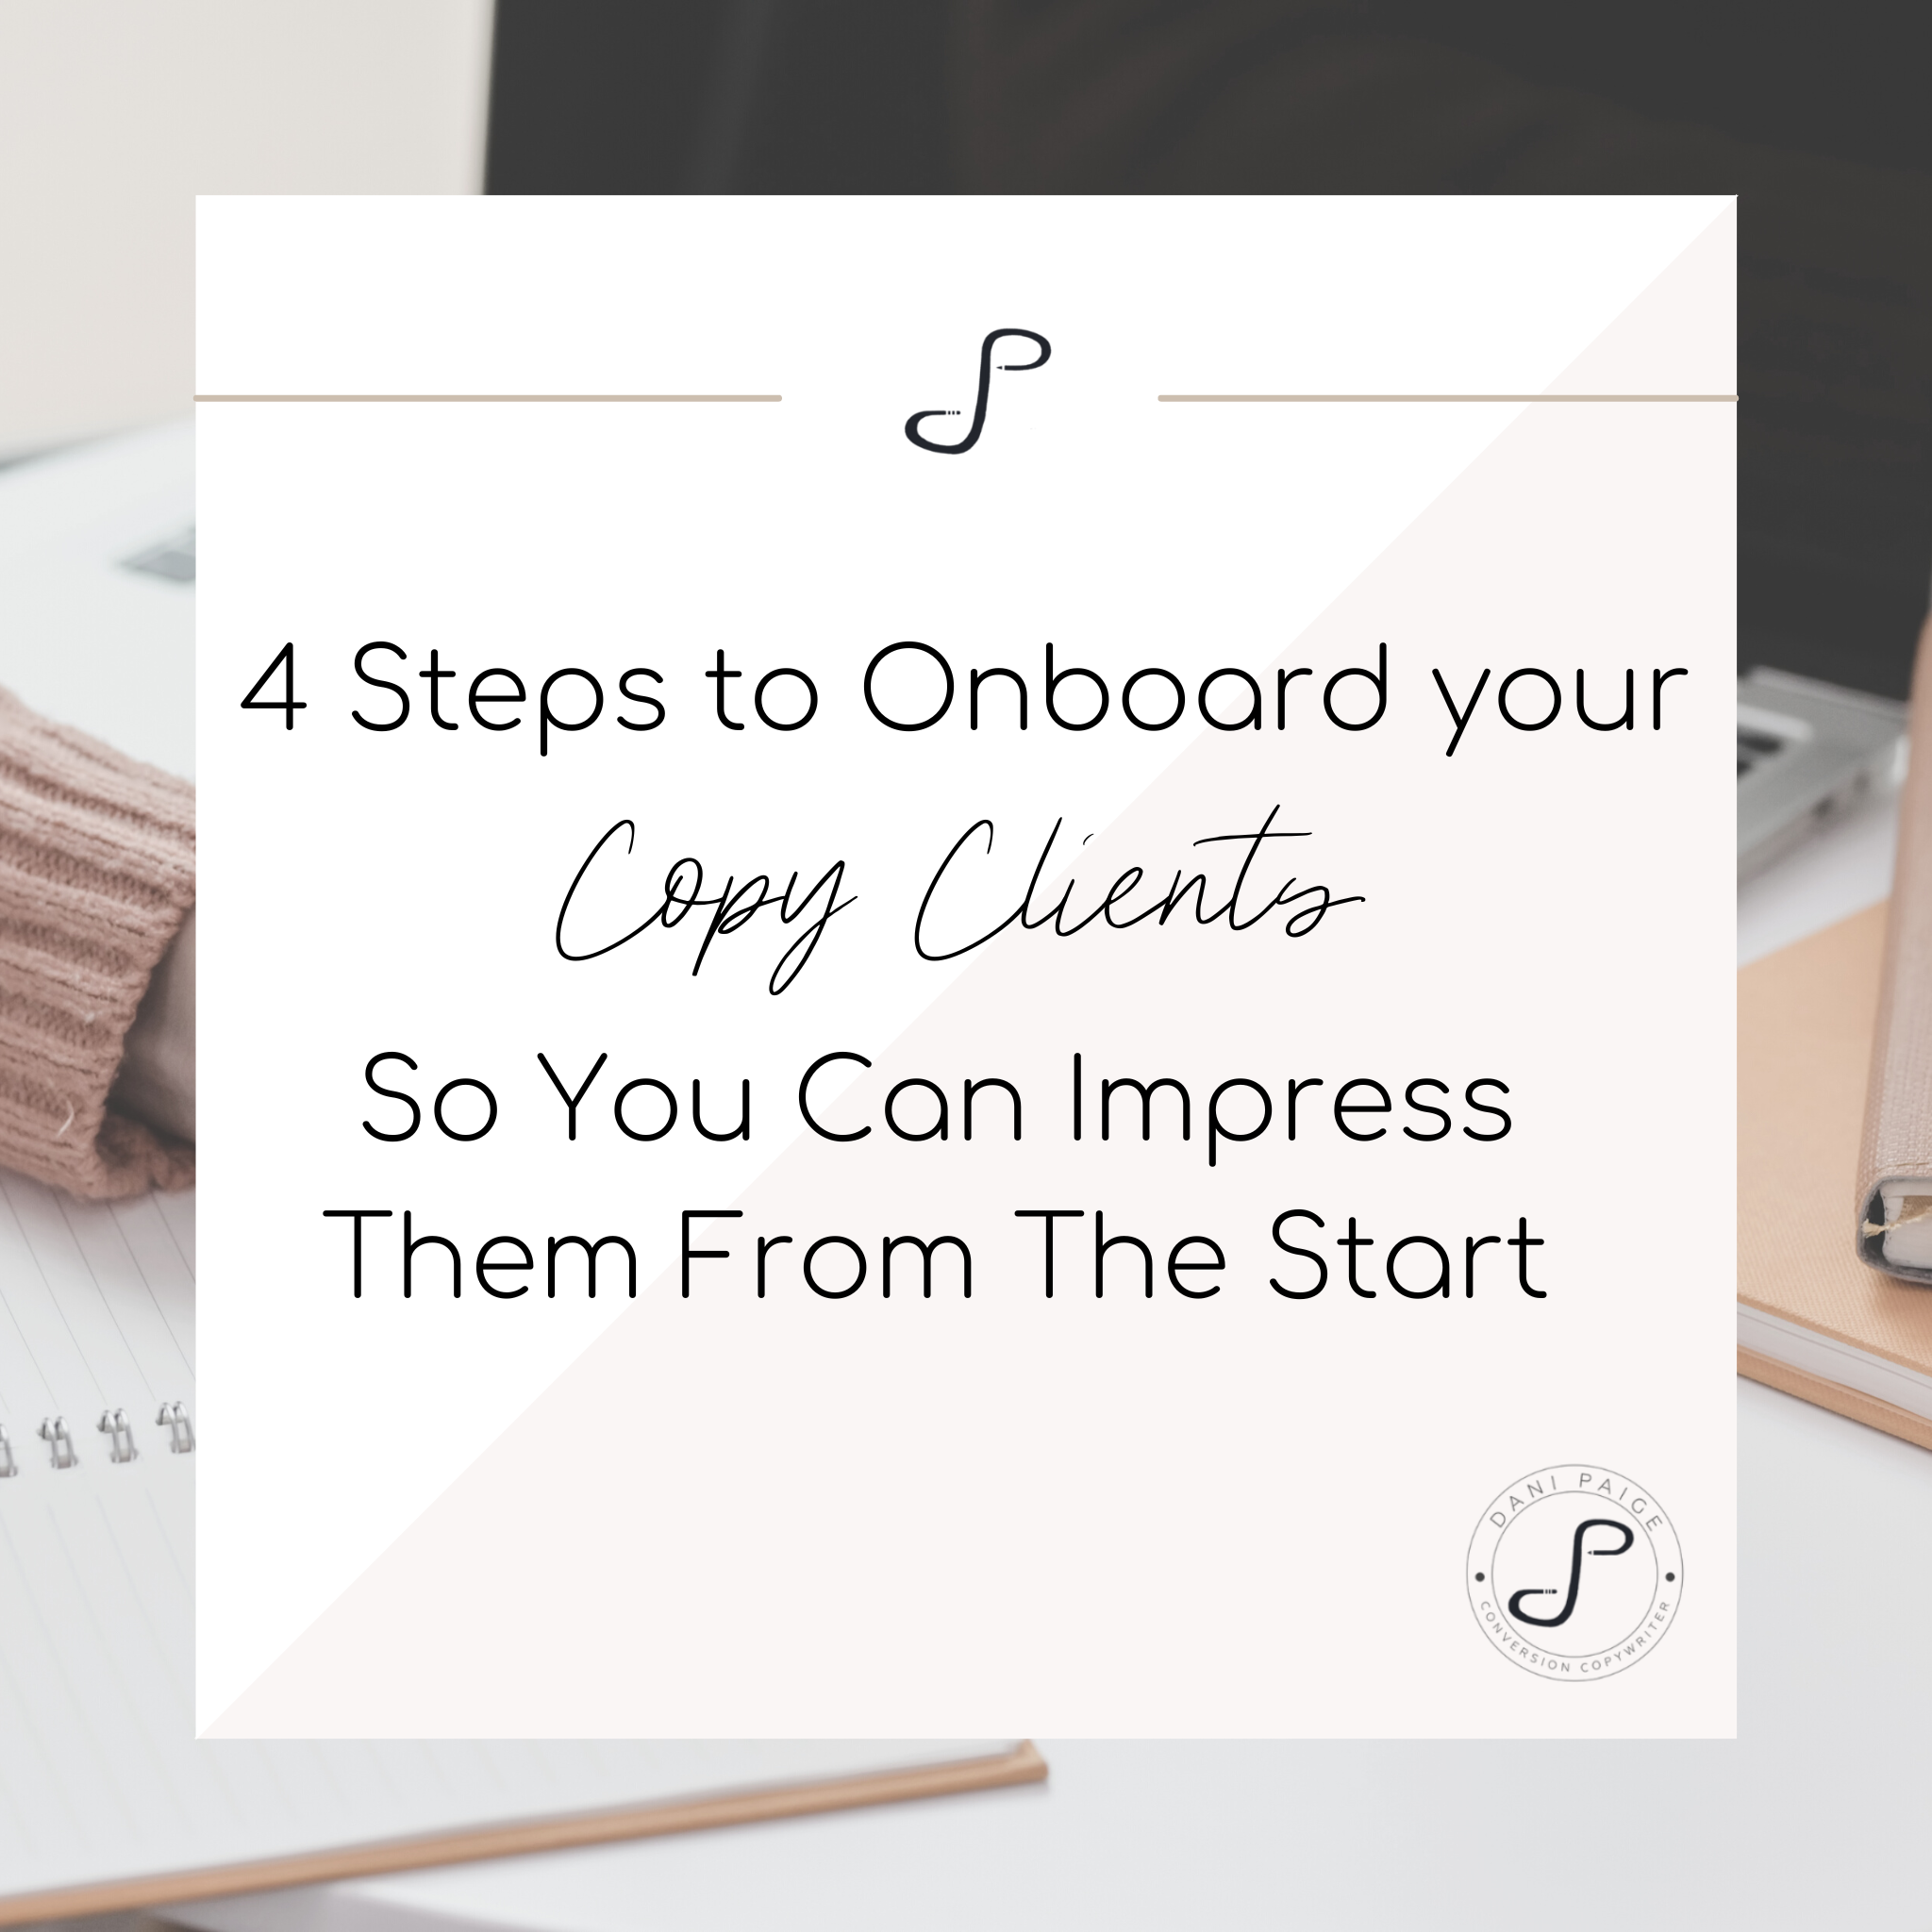 4 Steps to Onboard you Copy Clients So You Can Impress Them From Start